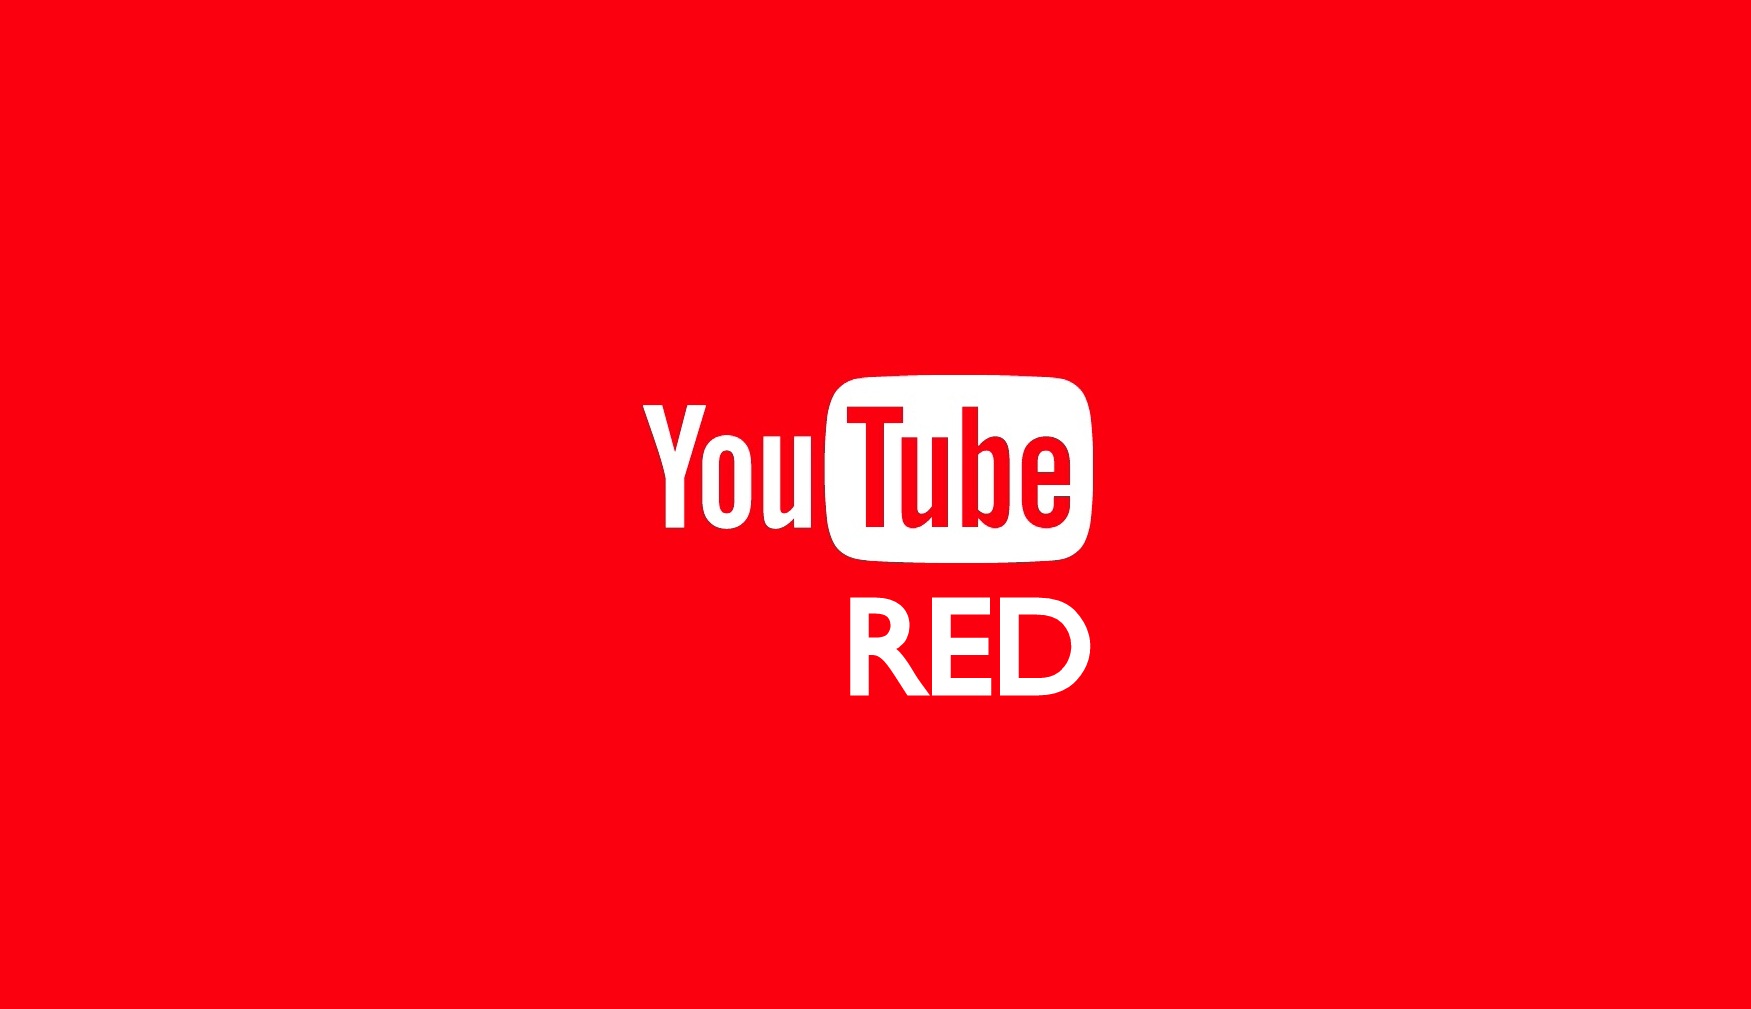 All About YouTube Red